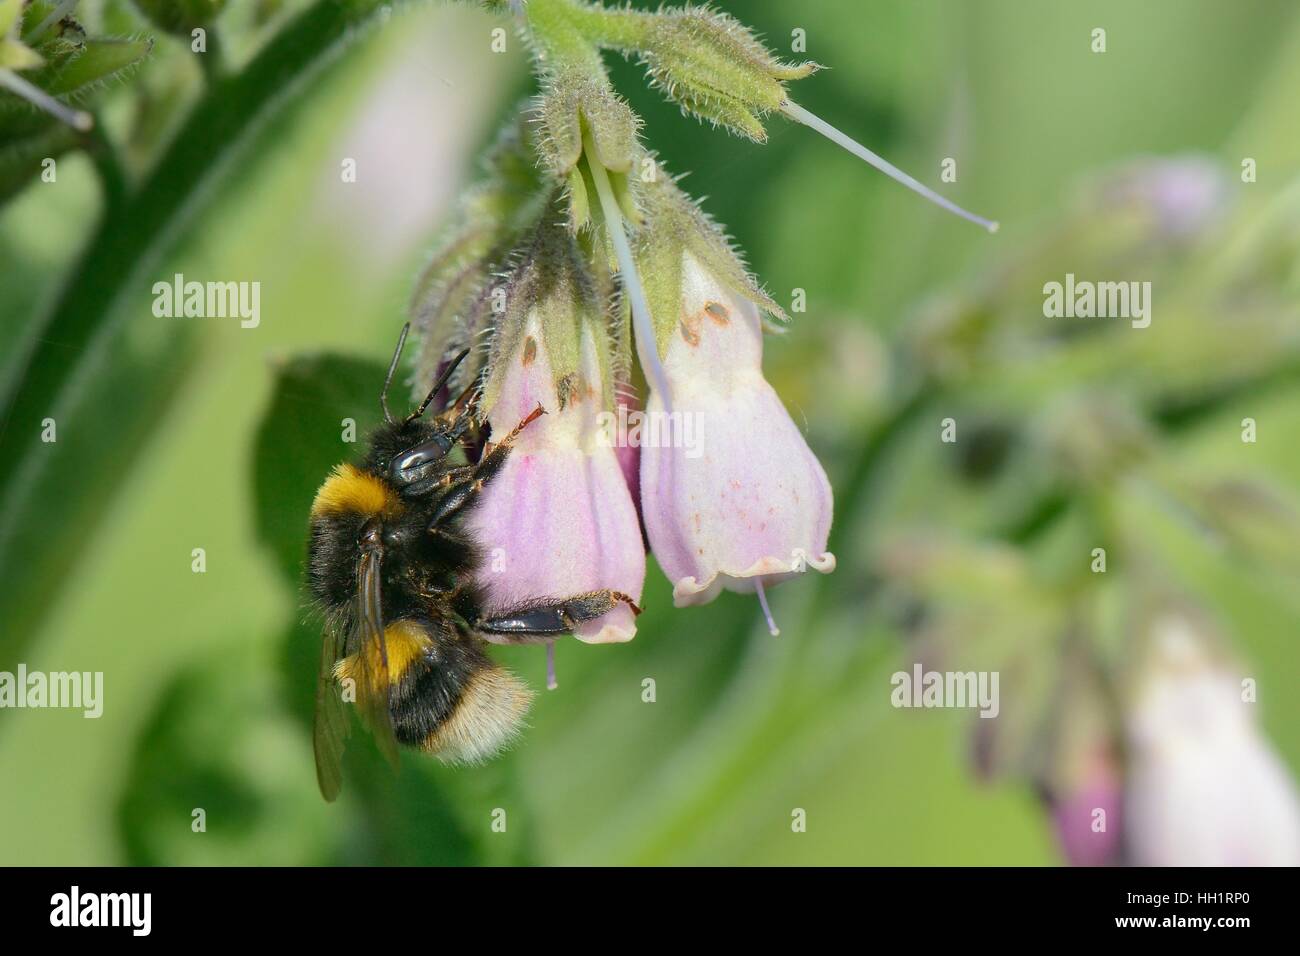 Buff-tailed bumblebee (Bombus terrestris) nectars on Common comfrey flowers (Symphytum officinale) in a Conservation headland. Stock Photo